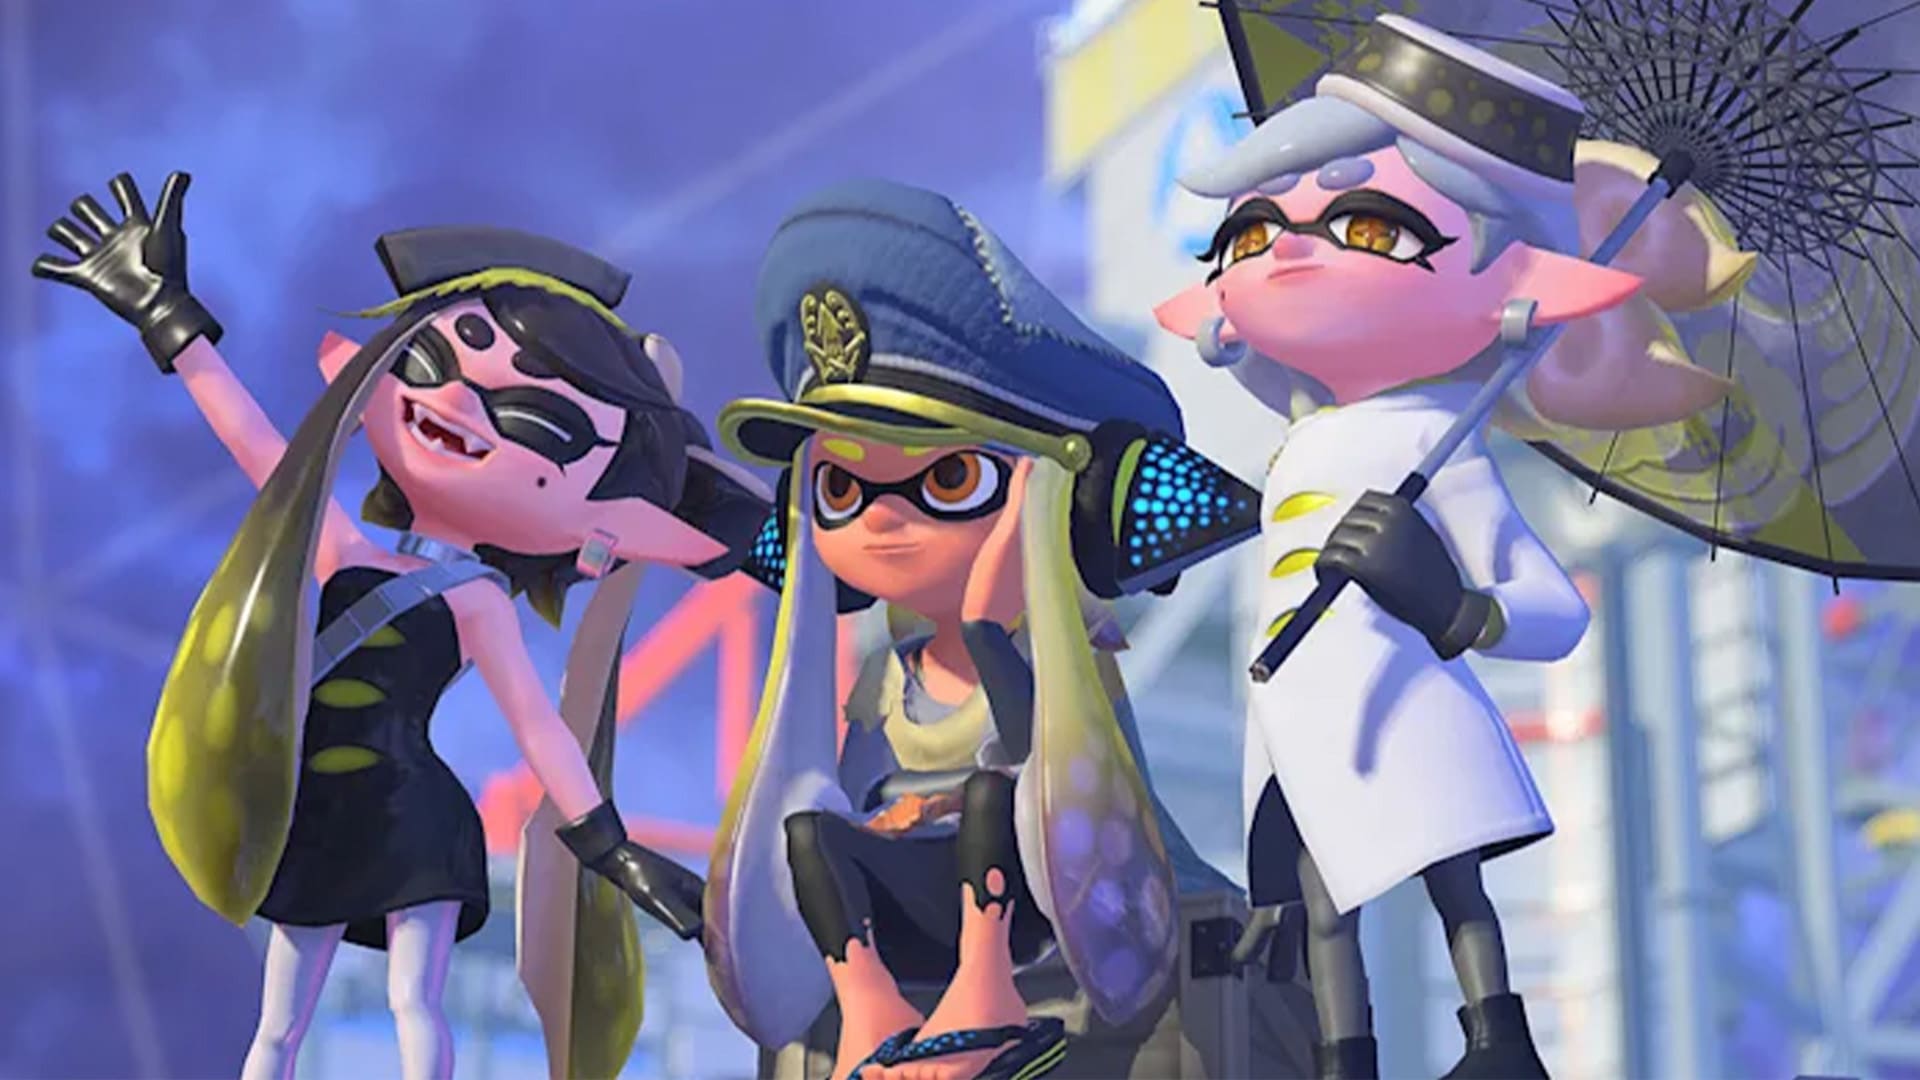 Catch up on what Splatoon 3 has to offer Screenshot 3